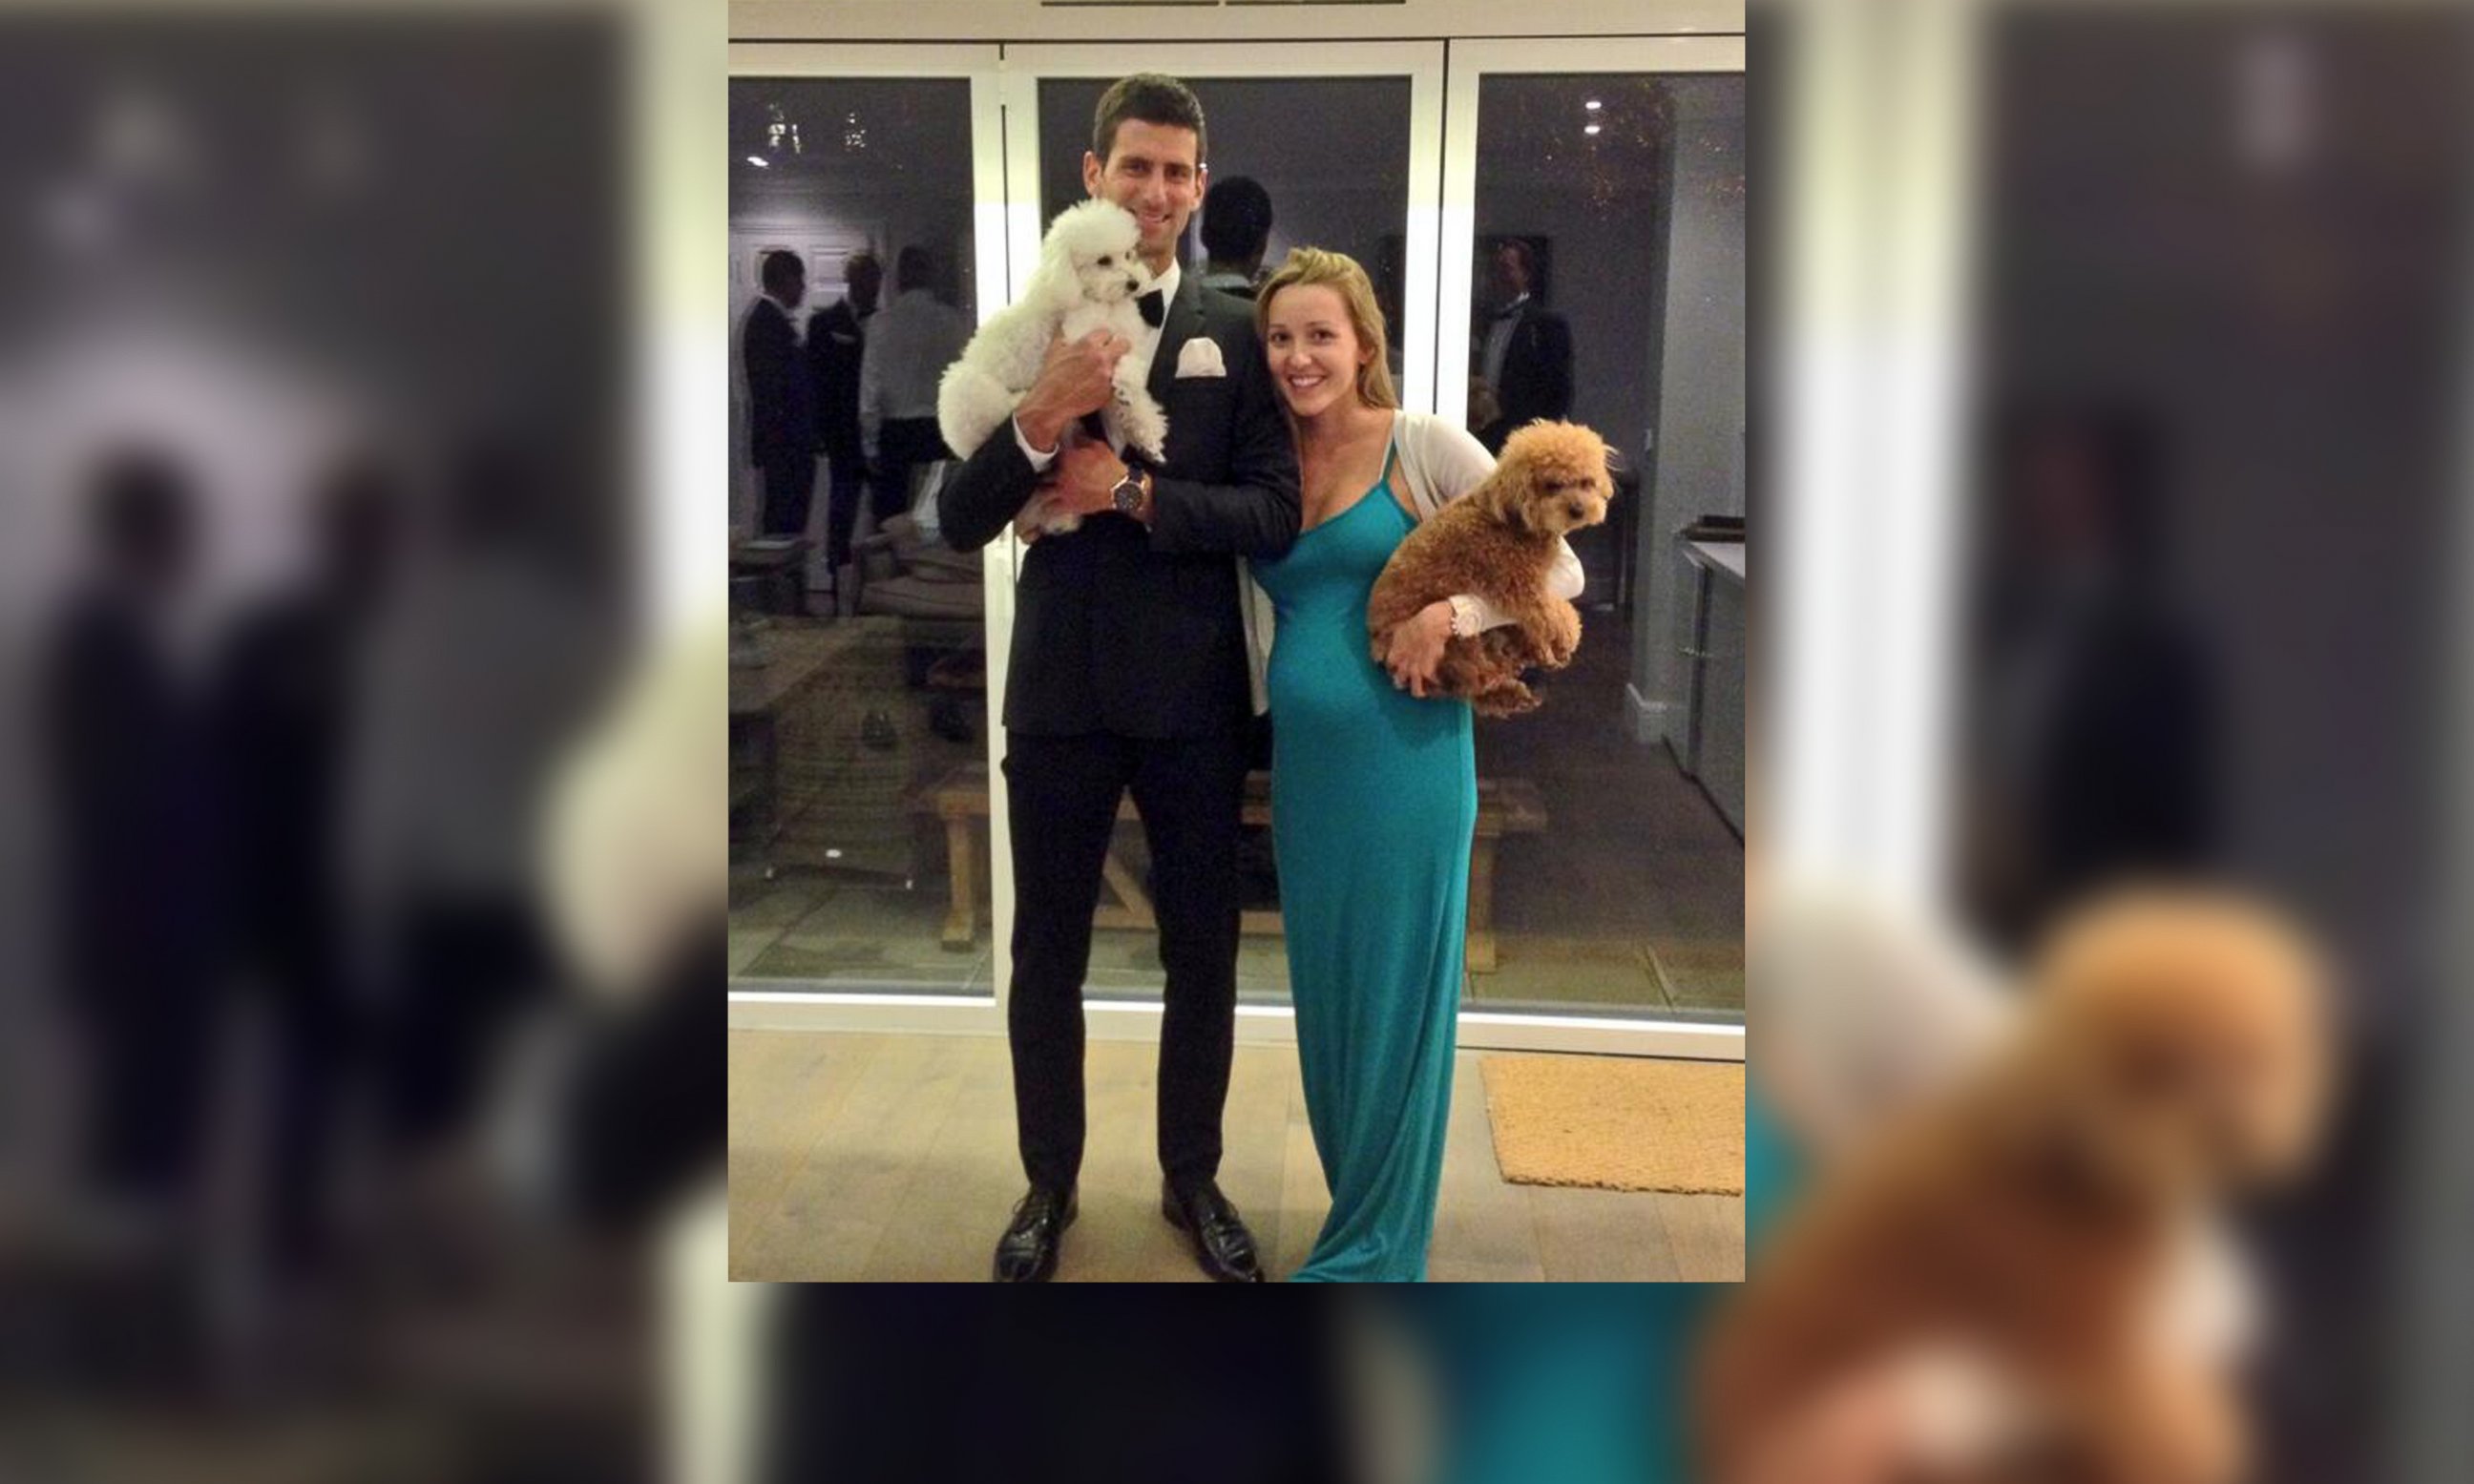 PHOTO: Novak Djokovic and Jelena Ristic are pictured in a photo posted to Djokovic's Twitter account on July 6, 2014 with the note, "My precious little family :)."